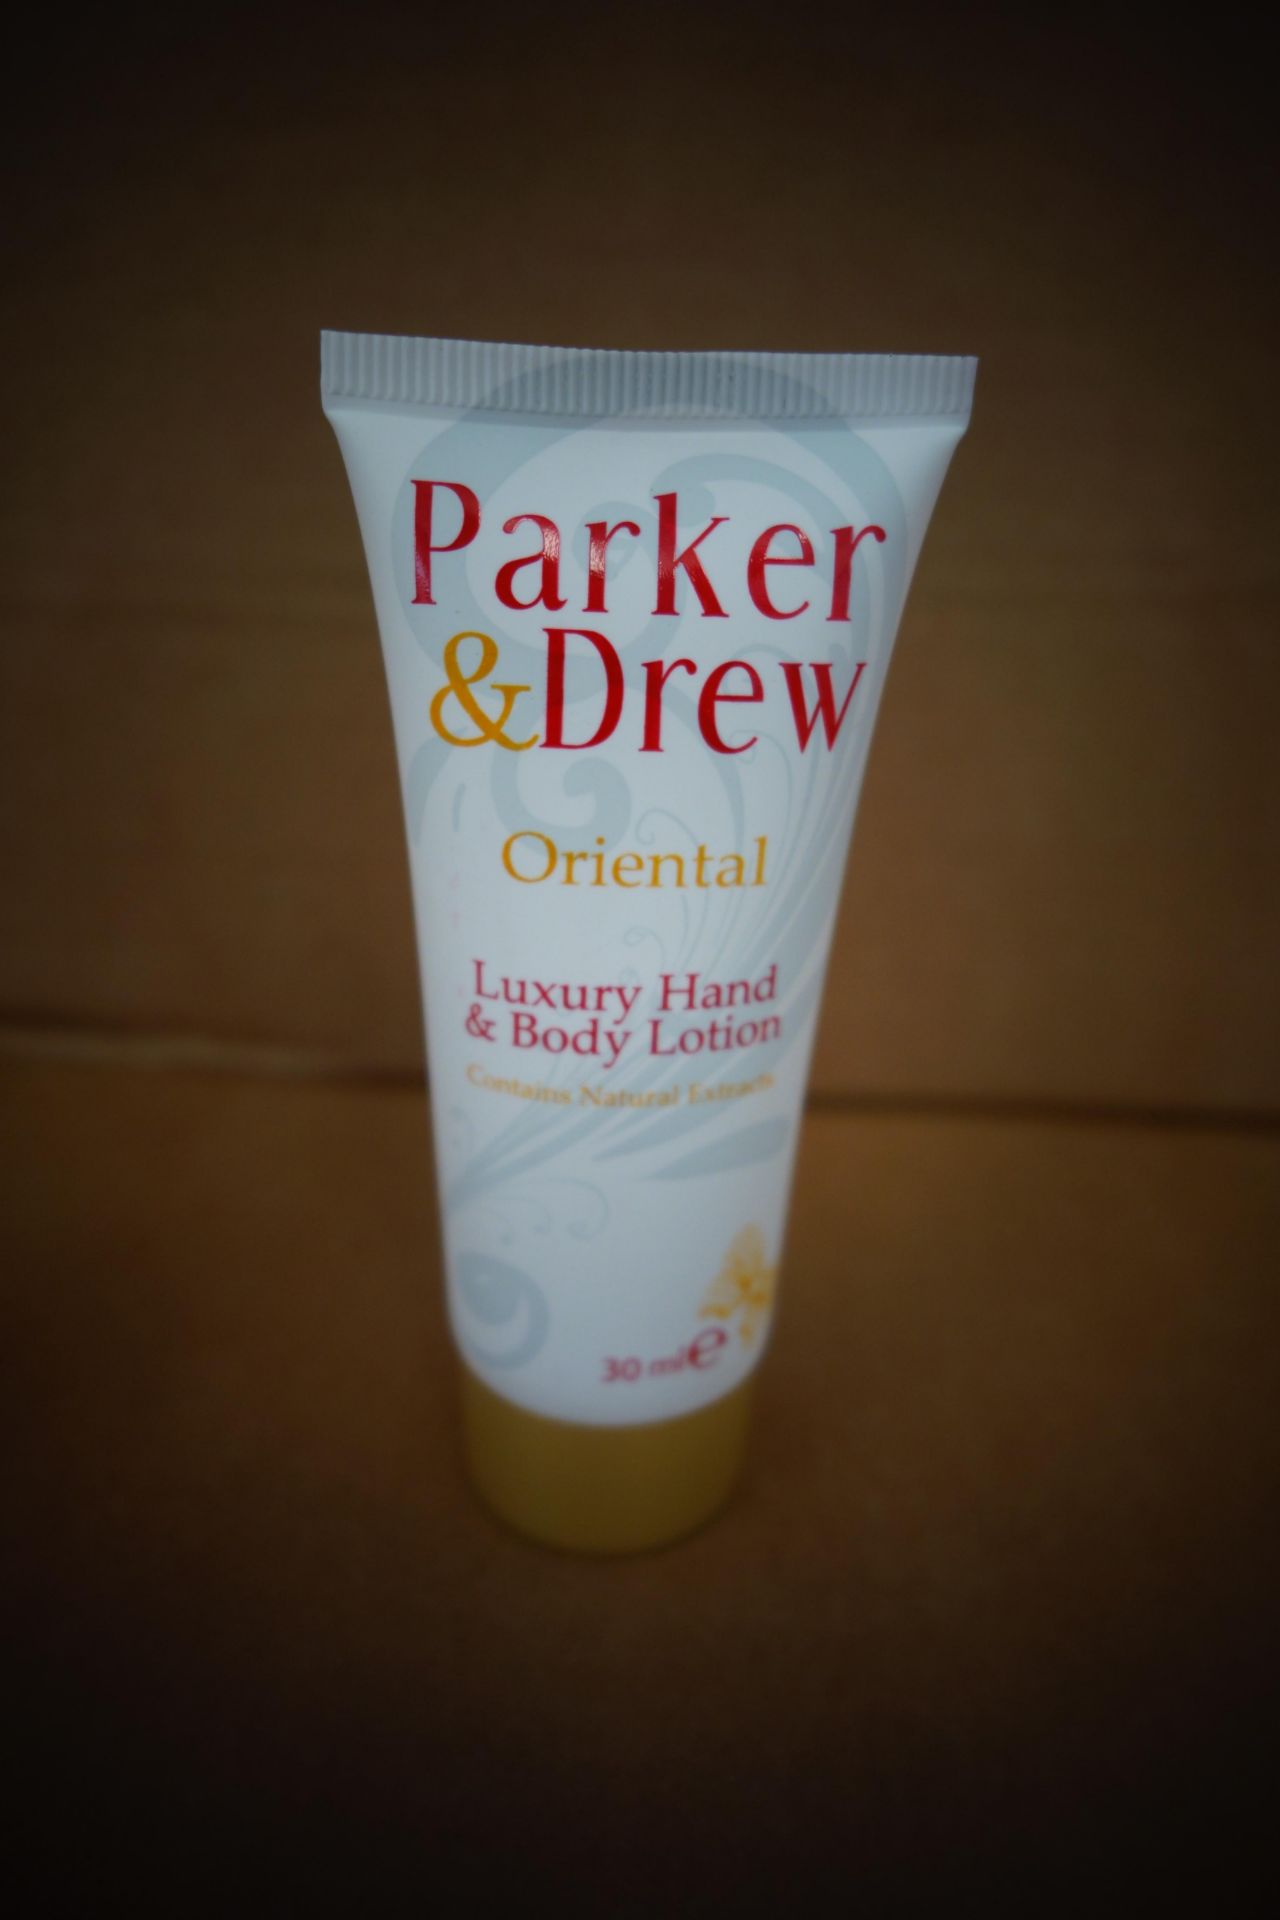 300 x Parker & Drew Oriental Luxury Hand & Body Lotion. Contains Natural Extracts. 30ml. Unchecked